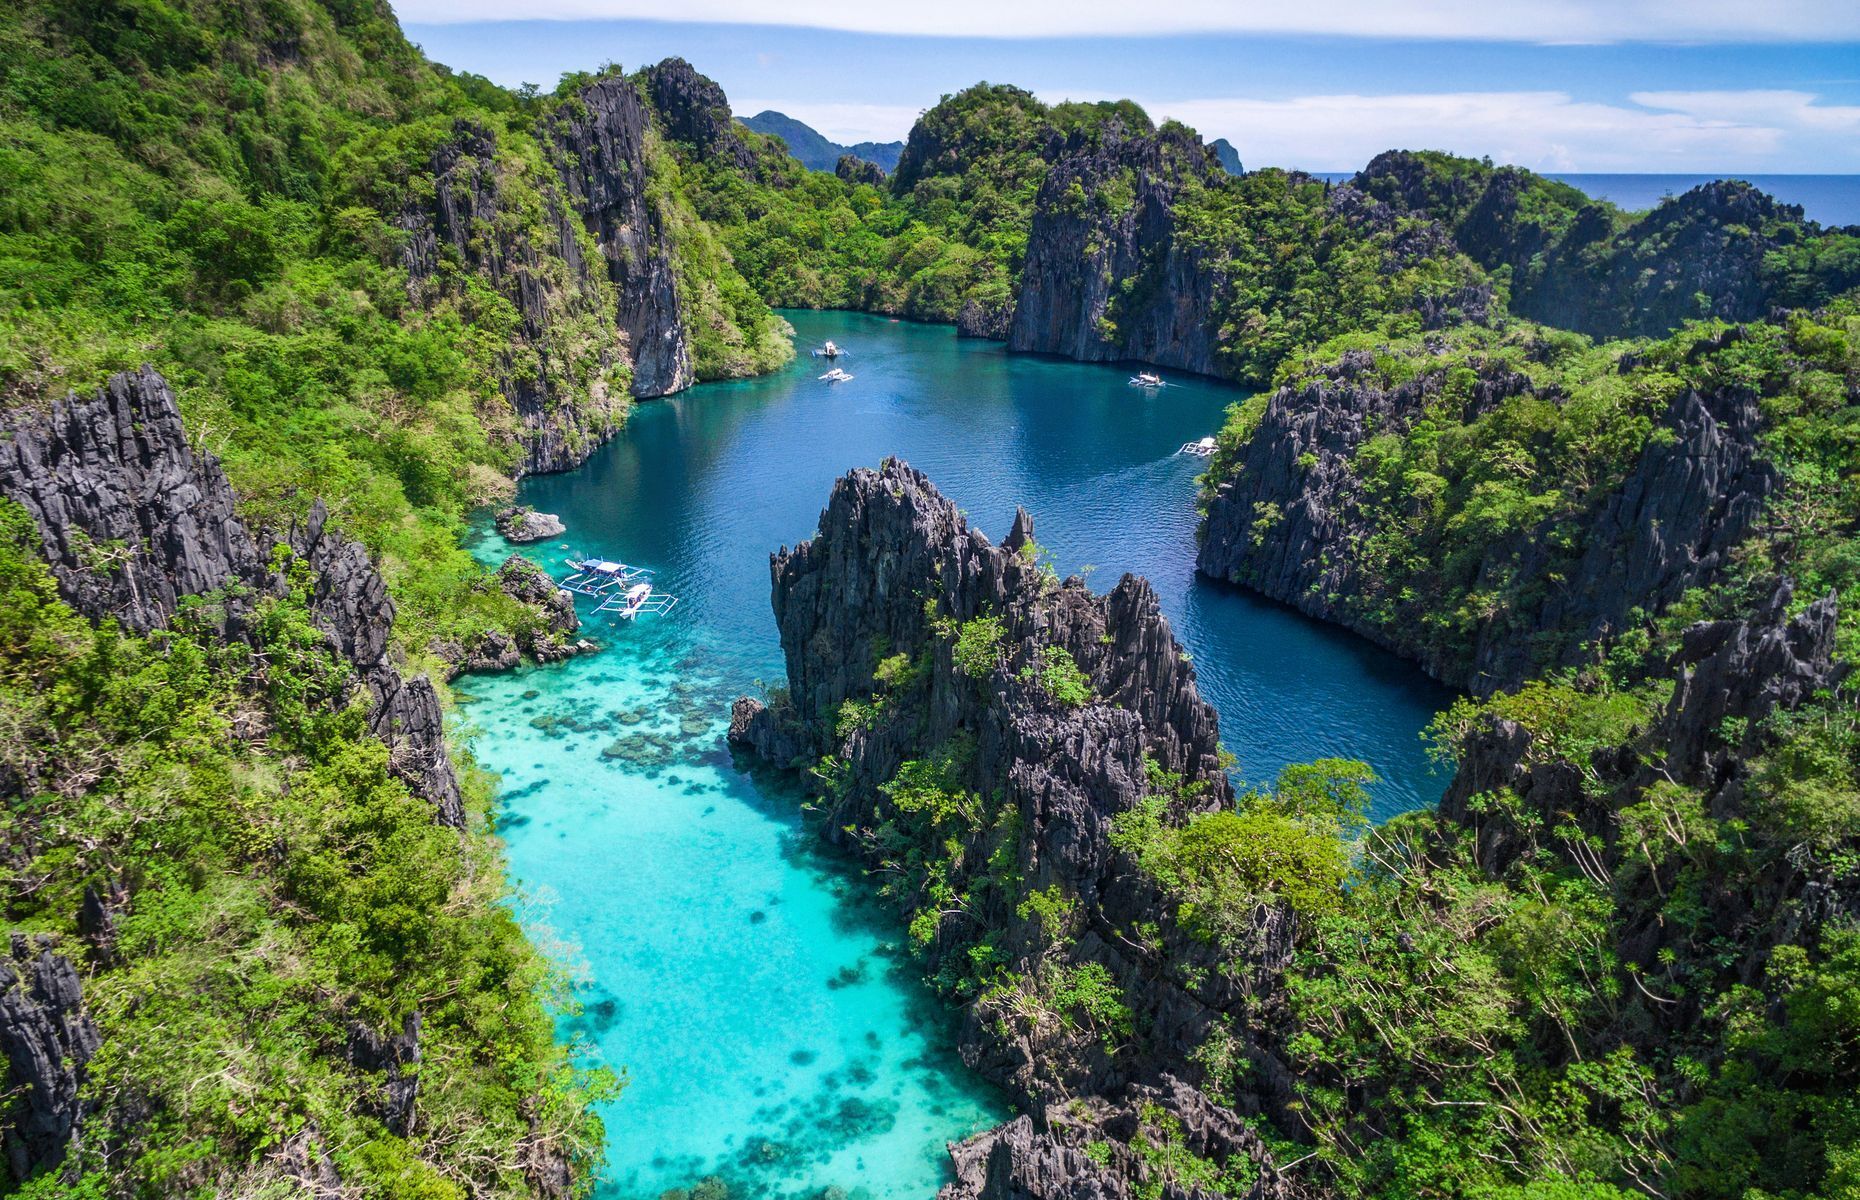 Visitors to <a href="https://www.elnidotourism.com/" rel="noreferrer noopener">El Nido</a>, in the Philippines’ <a href="https://www.nationalgeographic.com/travel/article/partner-content-go-island-hopping-in-palawan-philippines" rel="noreferrer noopener">Palawan archipelago</a>, will find its heavenly beaches the stuff of dreams. Impressive limestone karsts populate blue-green waters in stunning seascapes. Don’t hesitate to book a boat trip to discover hidden lagoons, white-sand beaches, and abundant coral reefs, perfect for snorkelling and scuba diving.